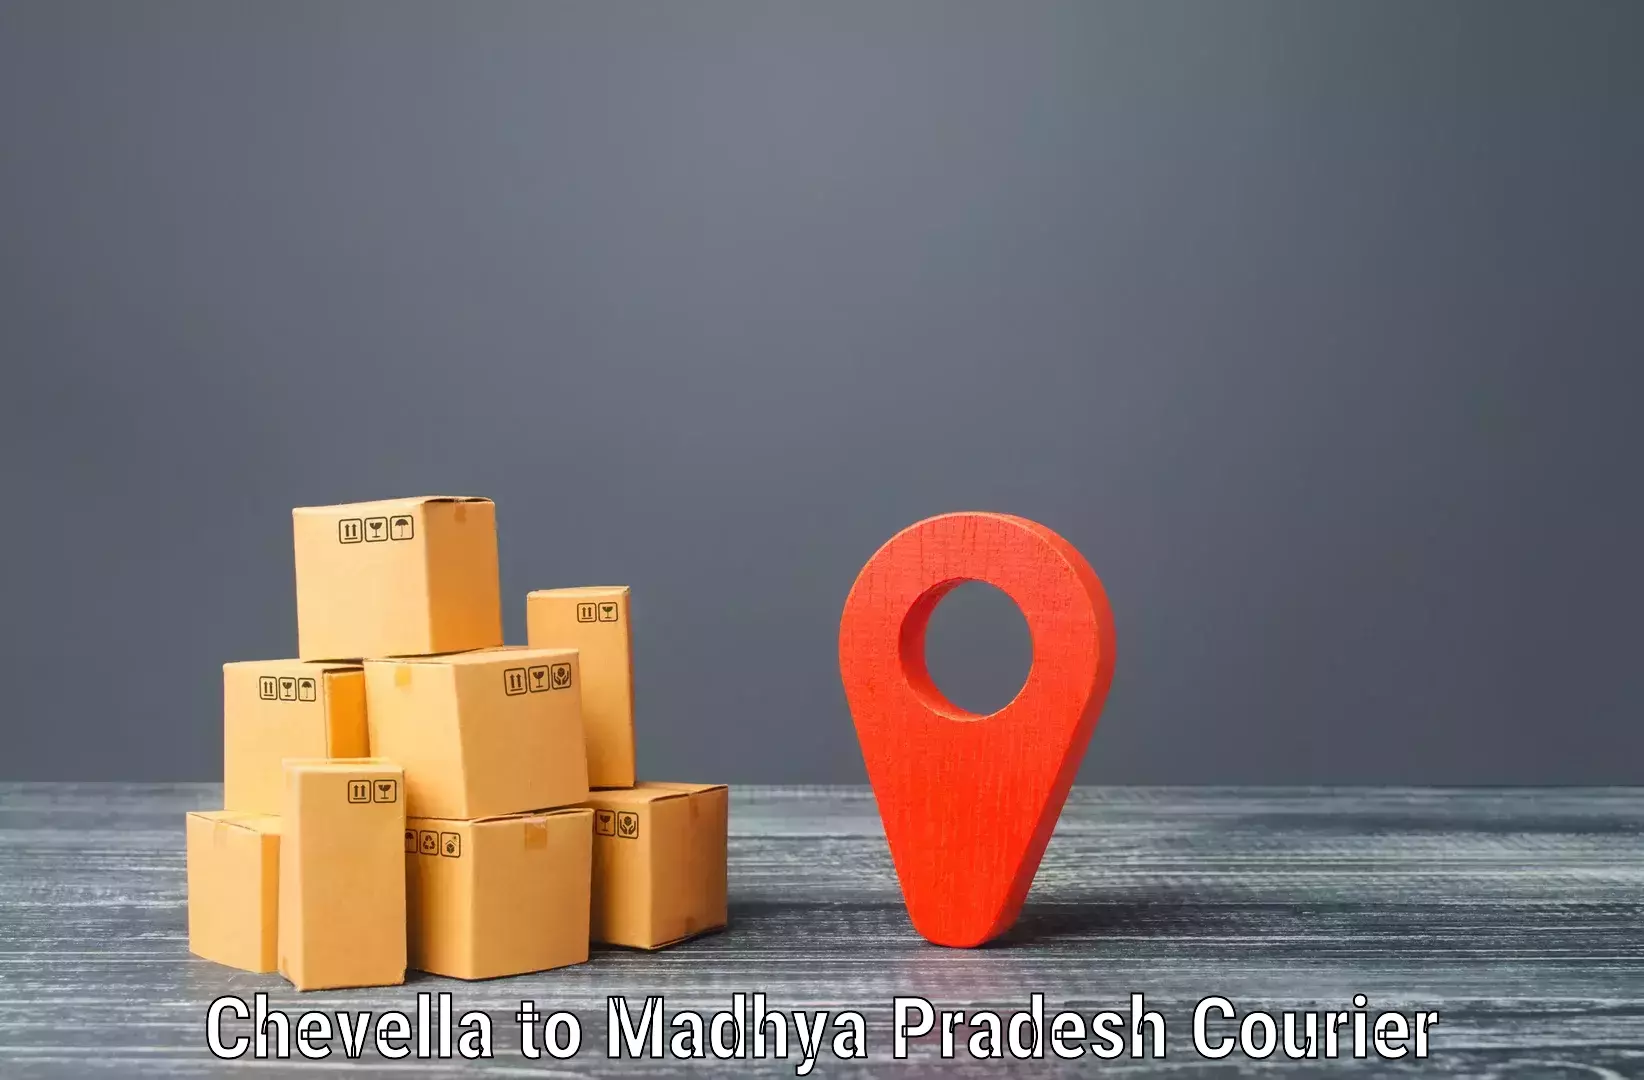 Express delivery capabilities Chevella to Udaipura